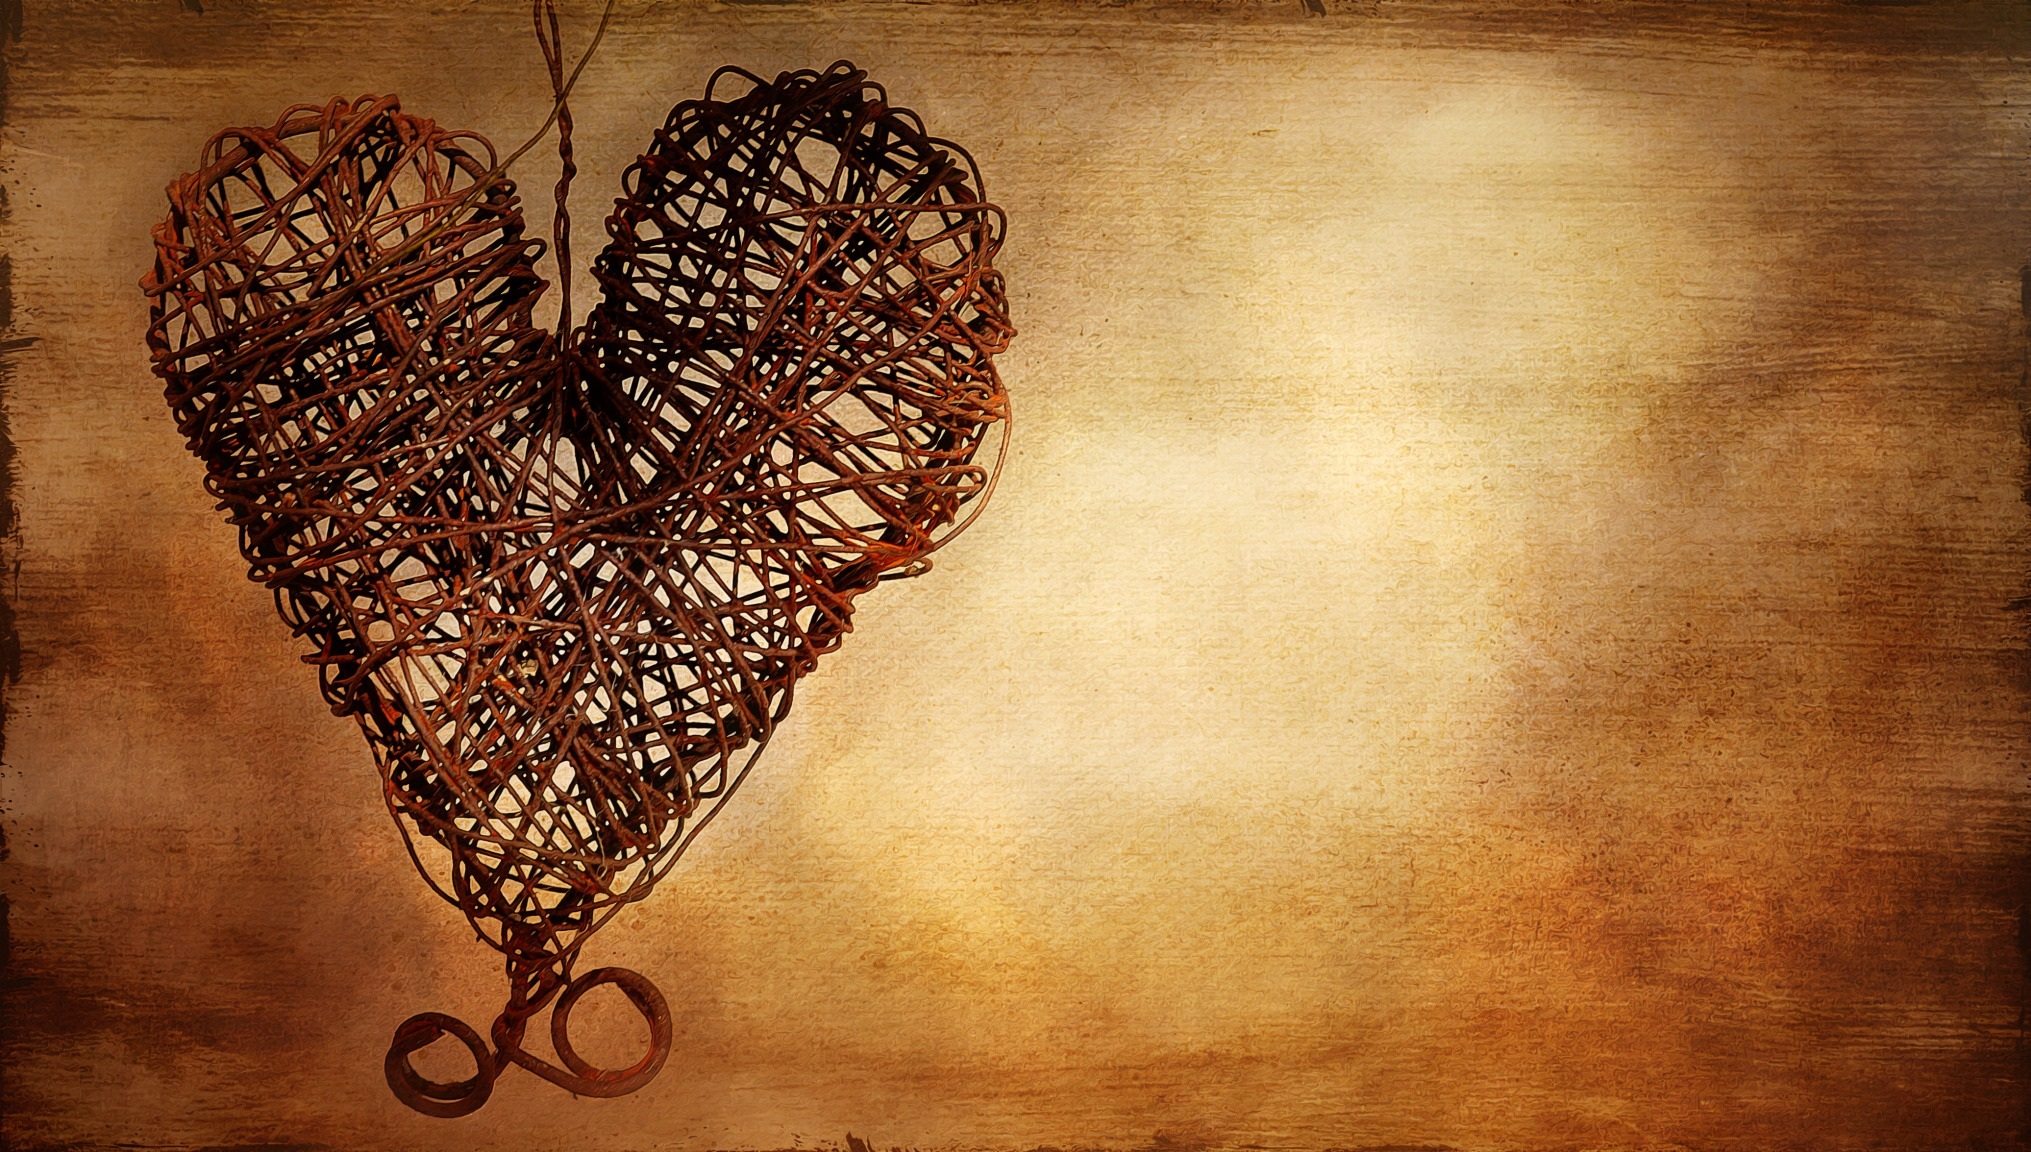 Free photo A crocheted heart made of rusty wire